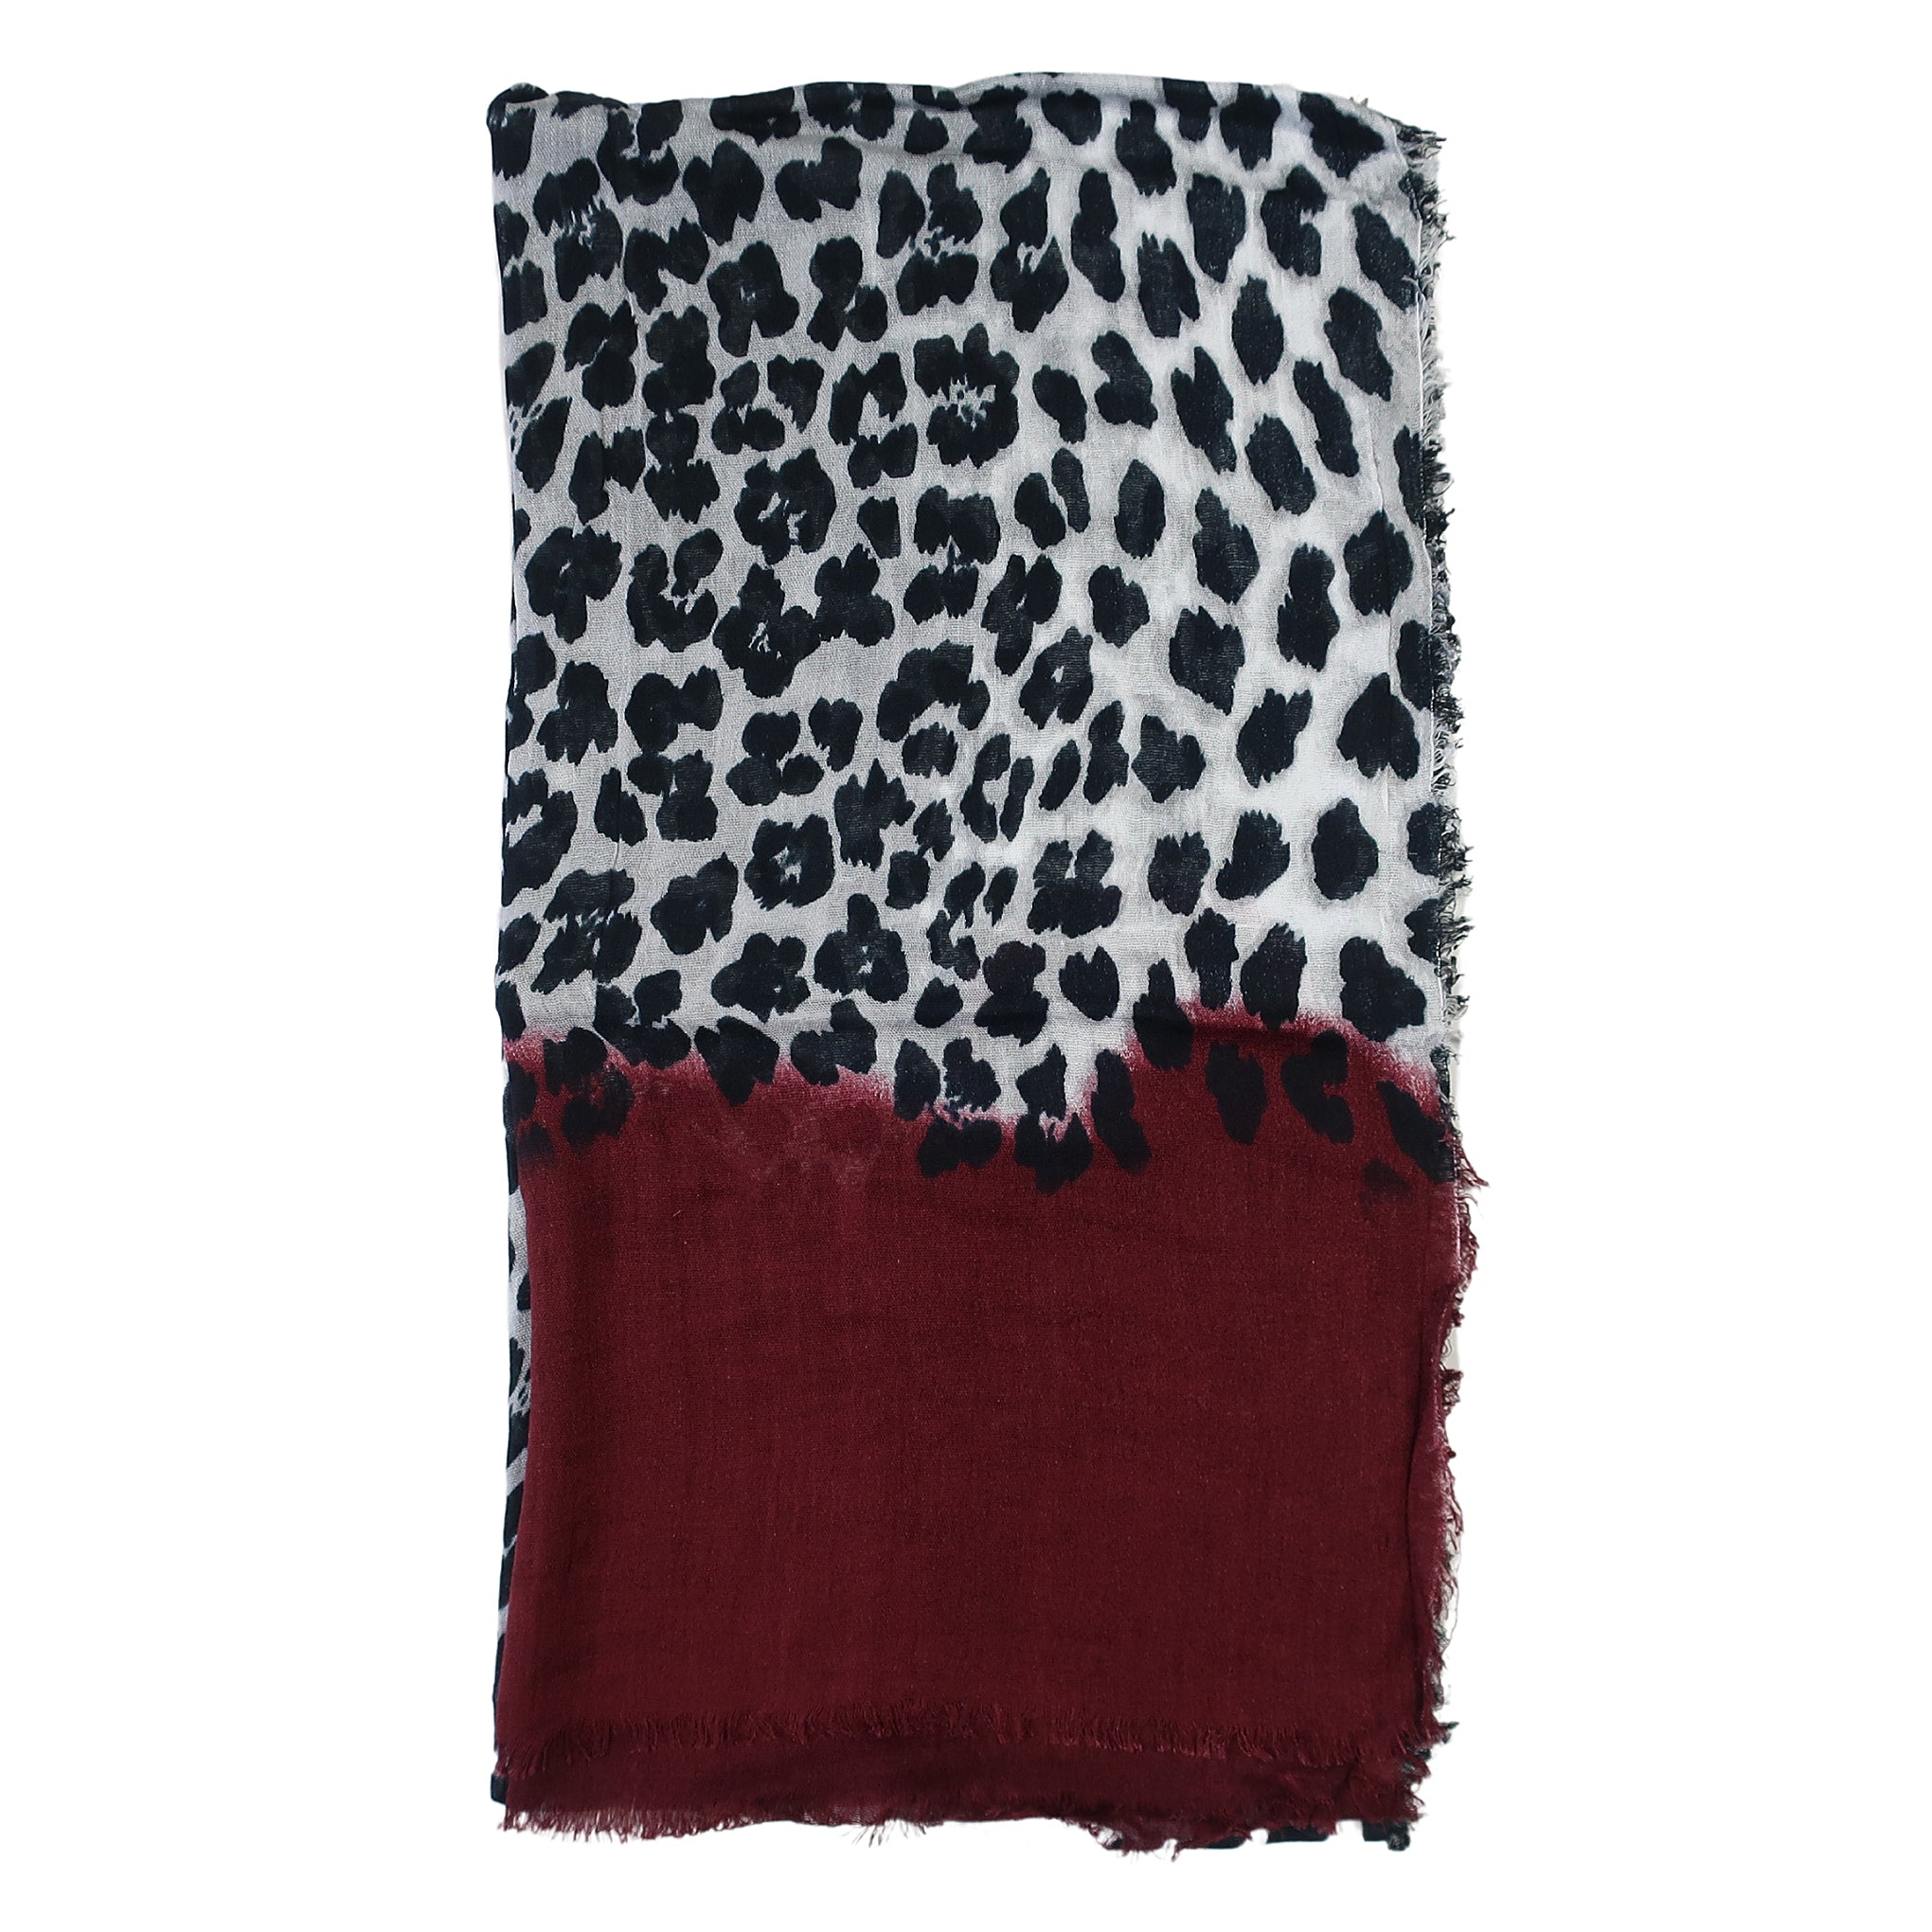 Blue Pacific Animal Print Cashmere Silk Scarf in Burgundy and Snow 78 x 22